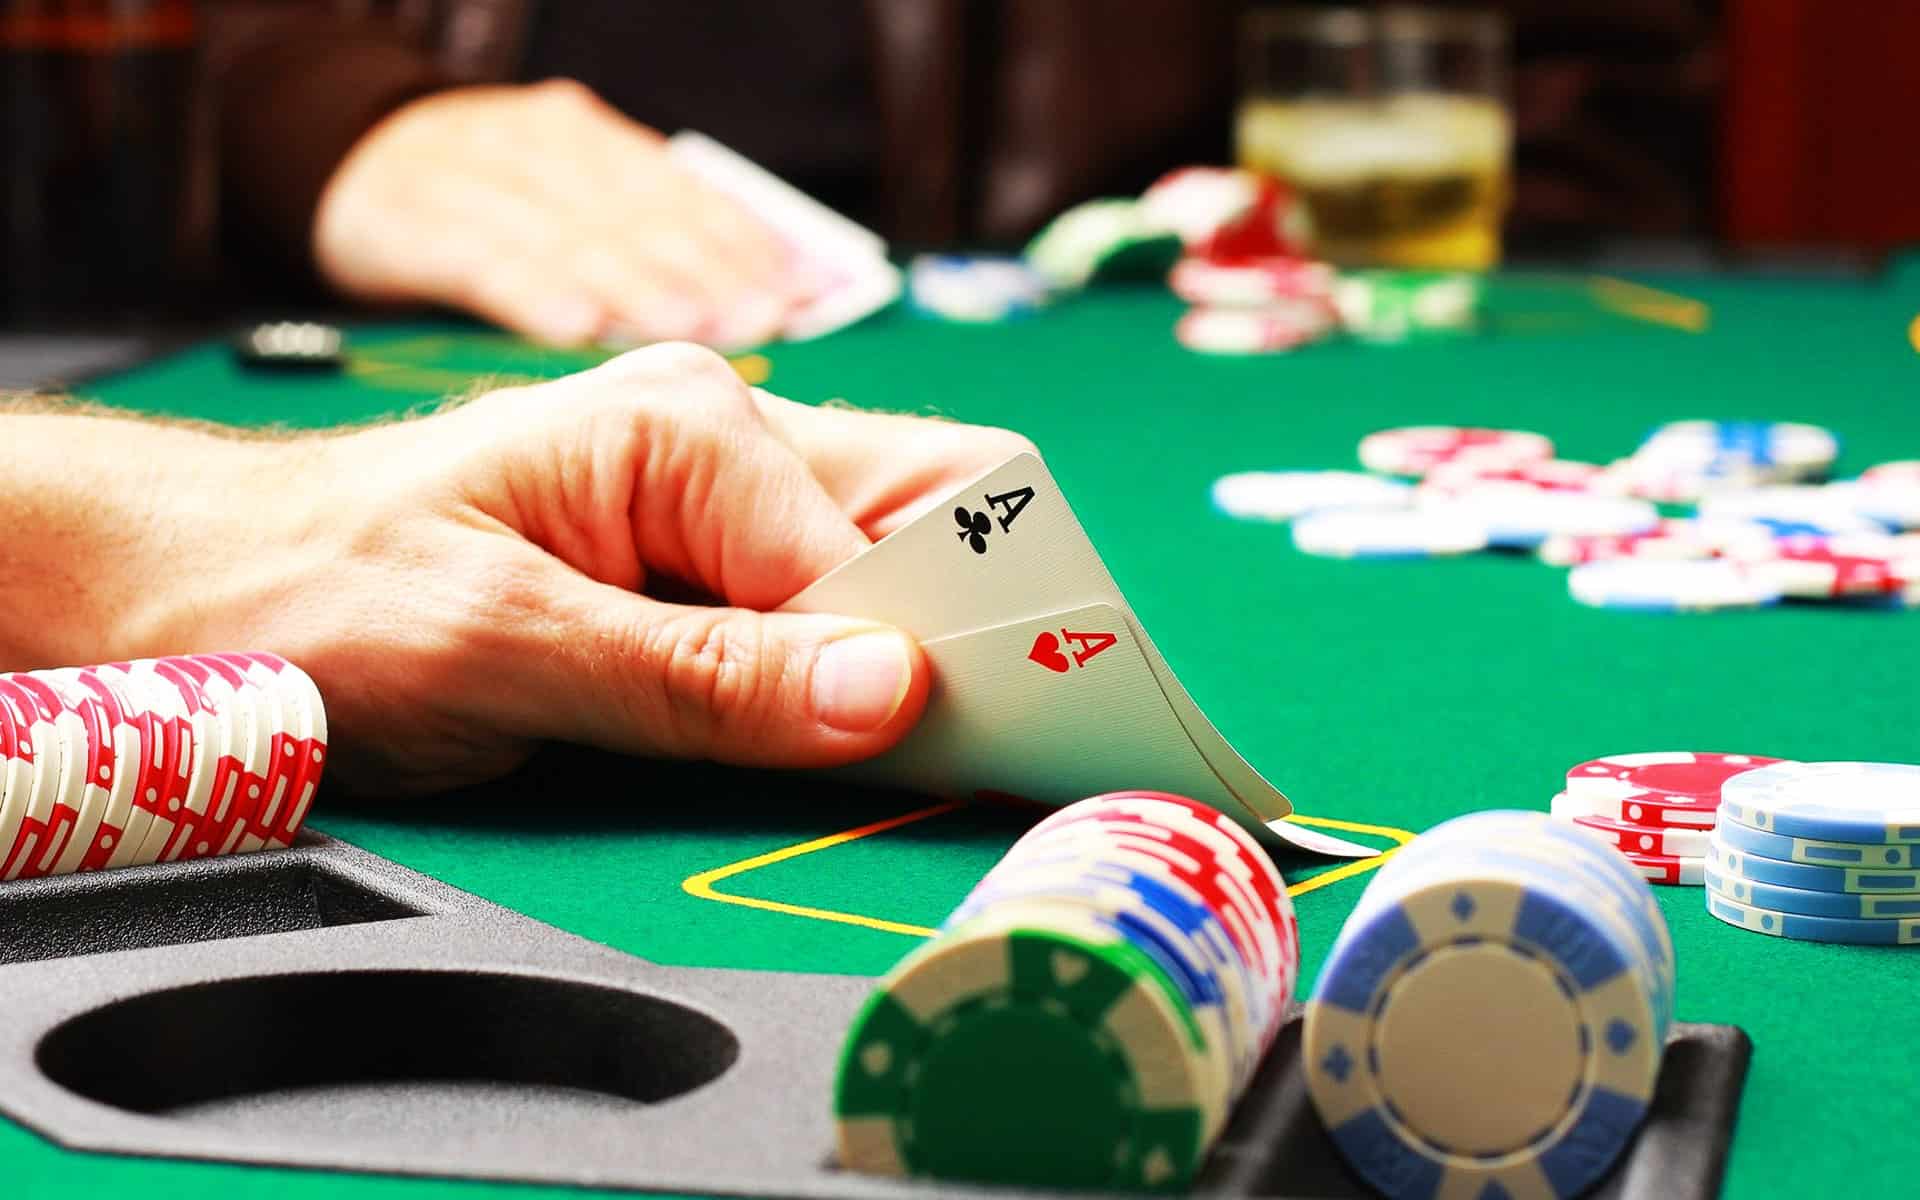 The pros and cons of playing against poker bots